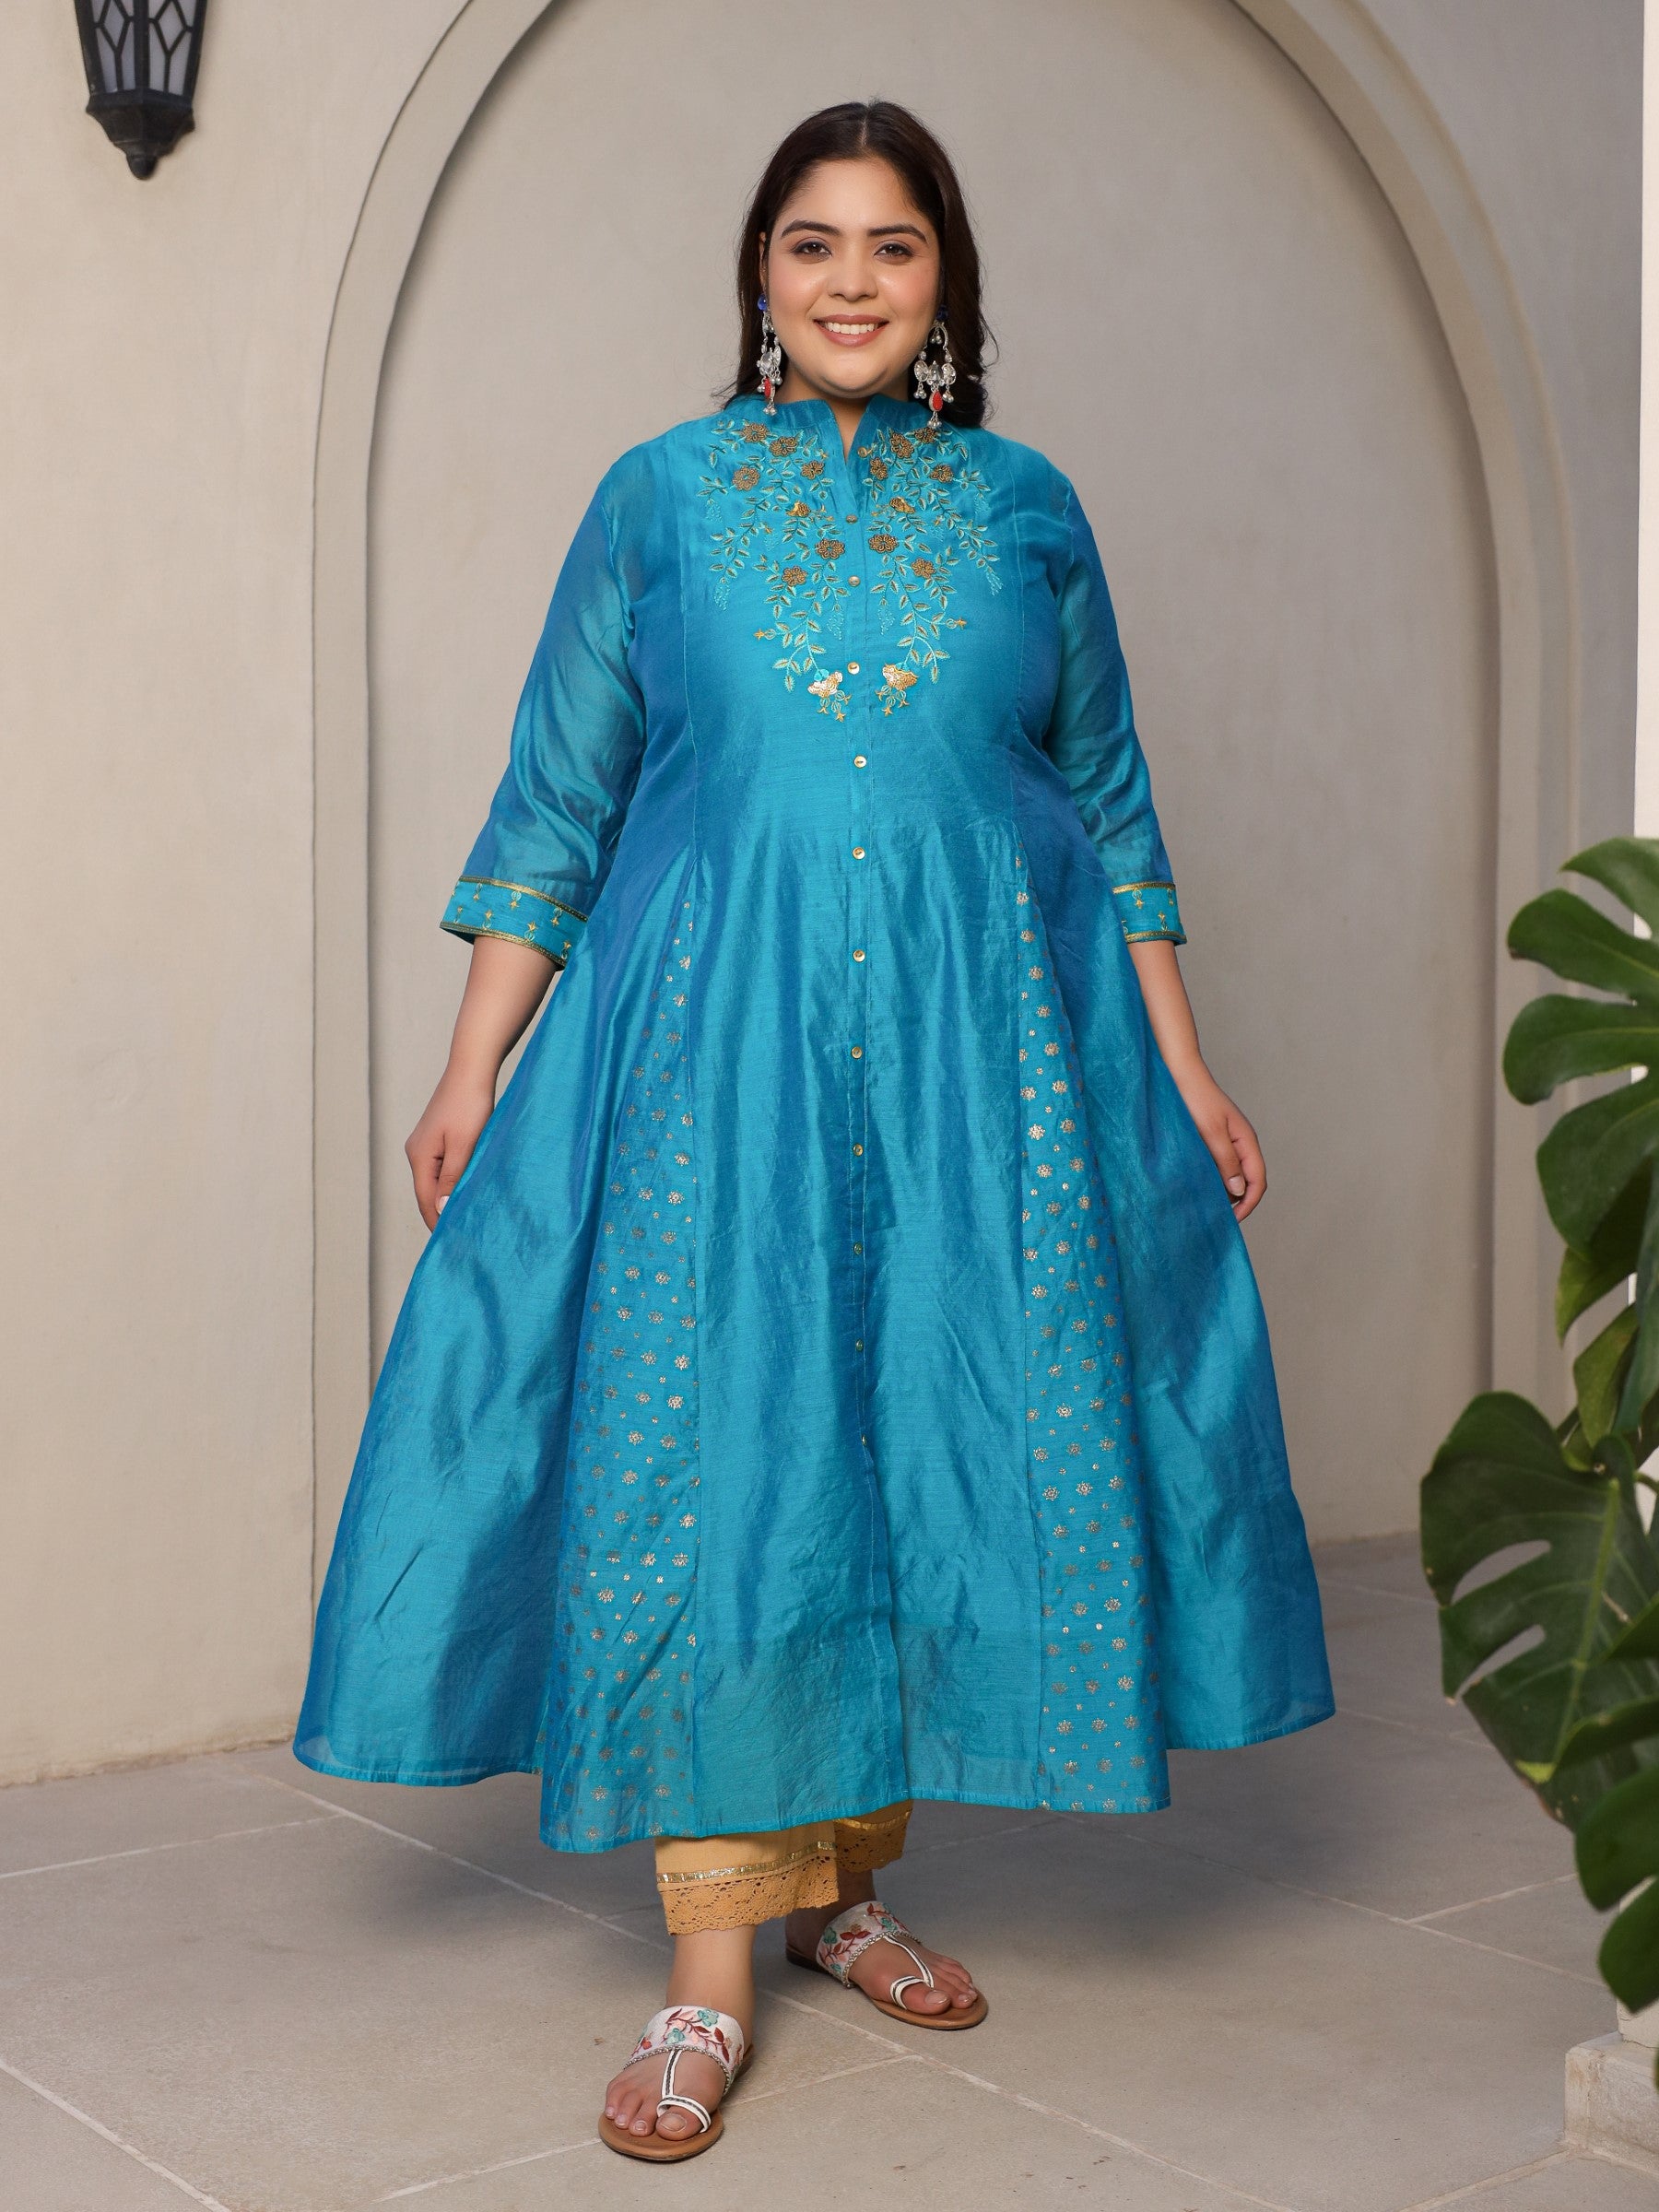 Teal Ethnic Motif Chanderi Printed & Panelled Plus Size Anarkali Kurta With Embroidery